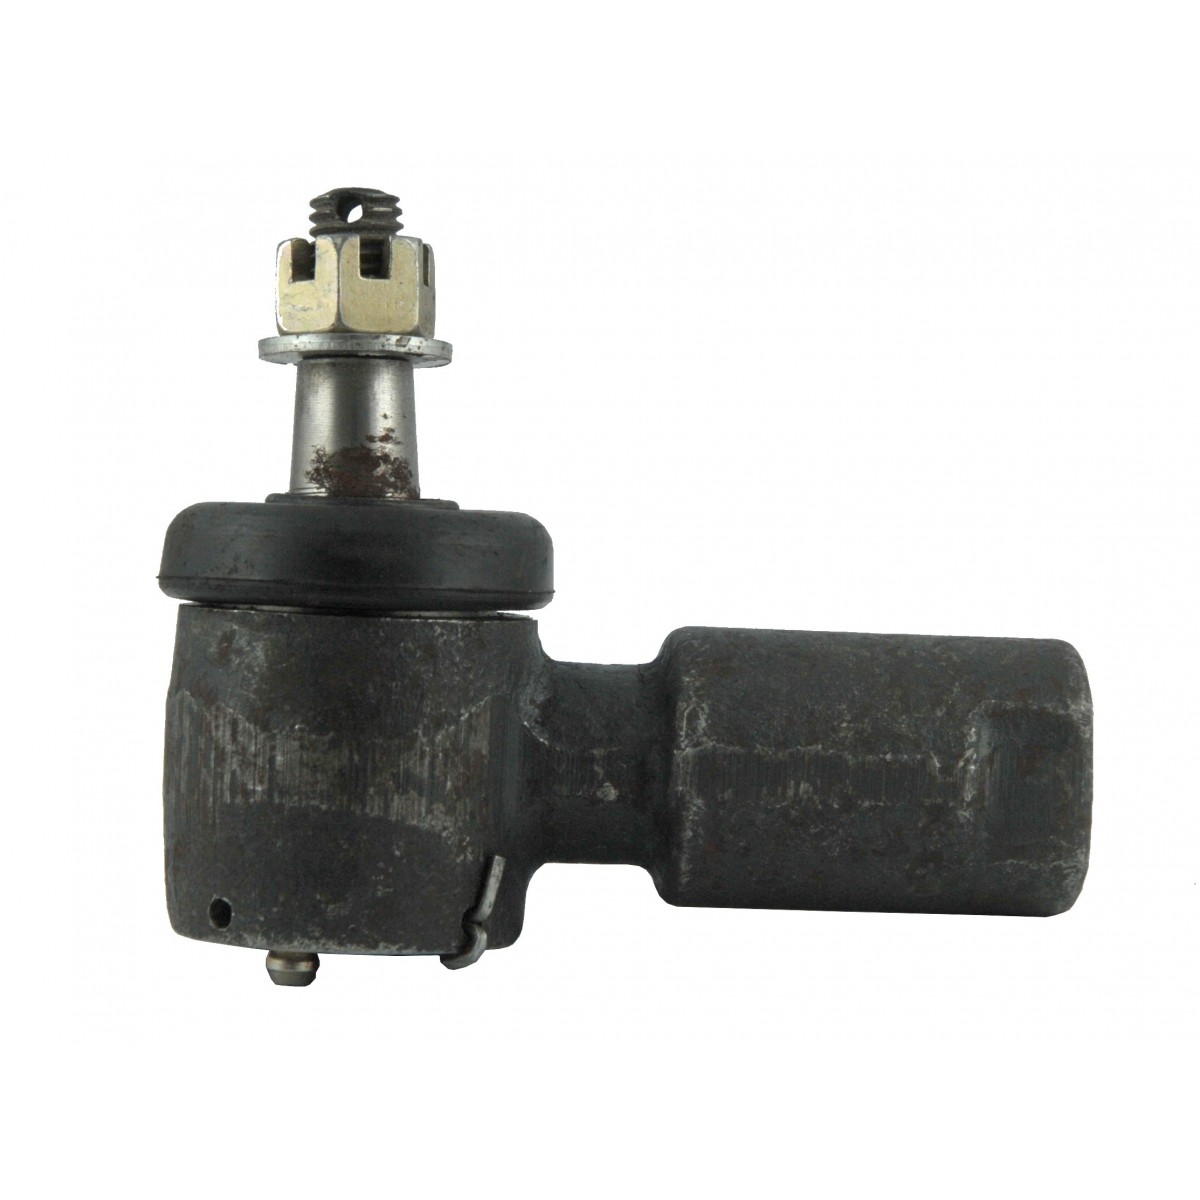 Jinma 244E power steering cylinder end